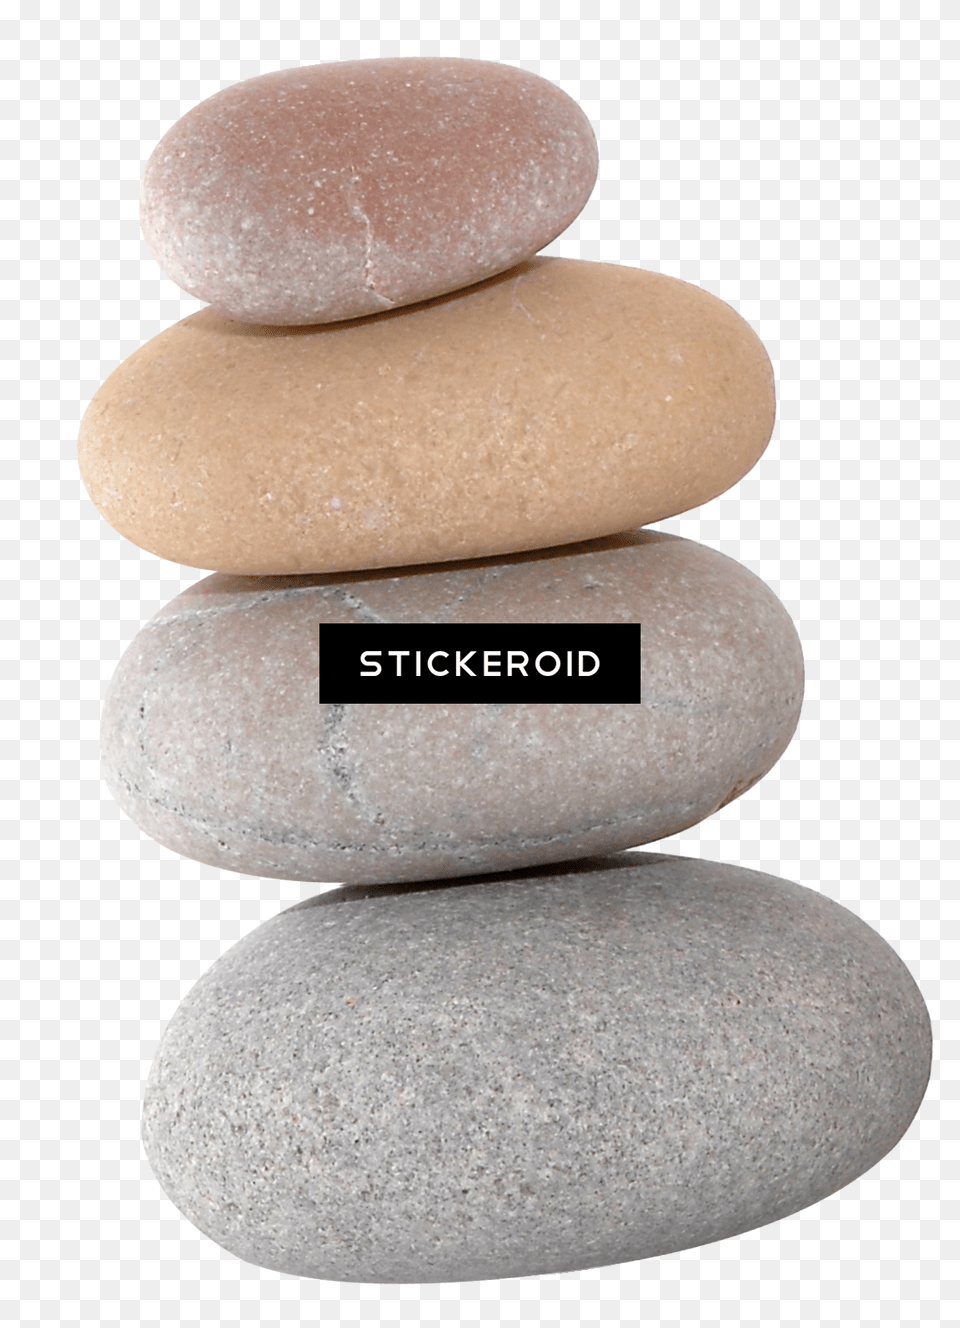 Stone And Rocks Stones Pebble, Rock Png